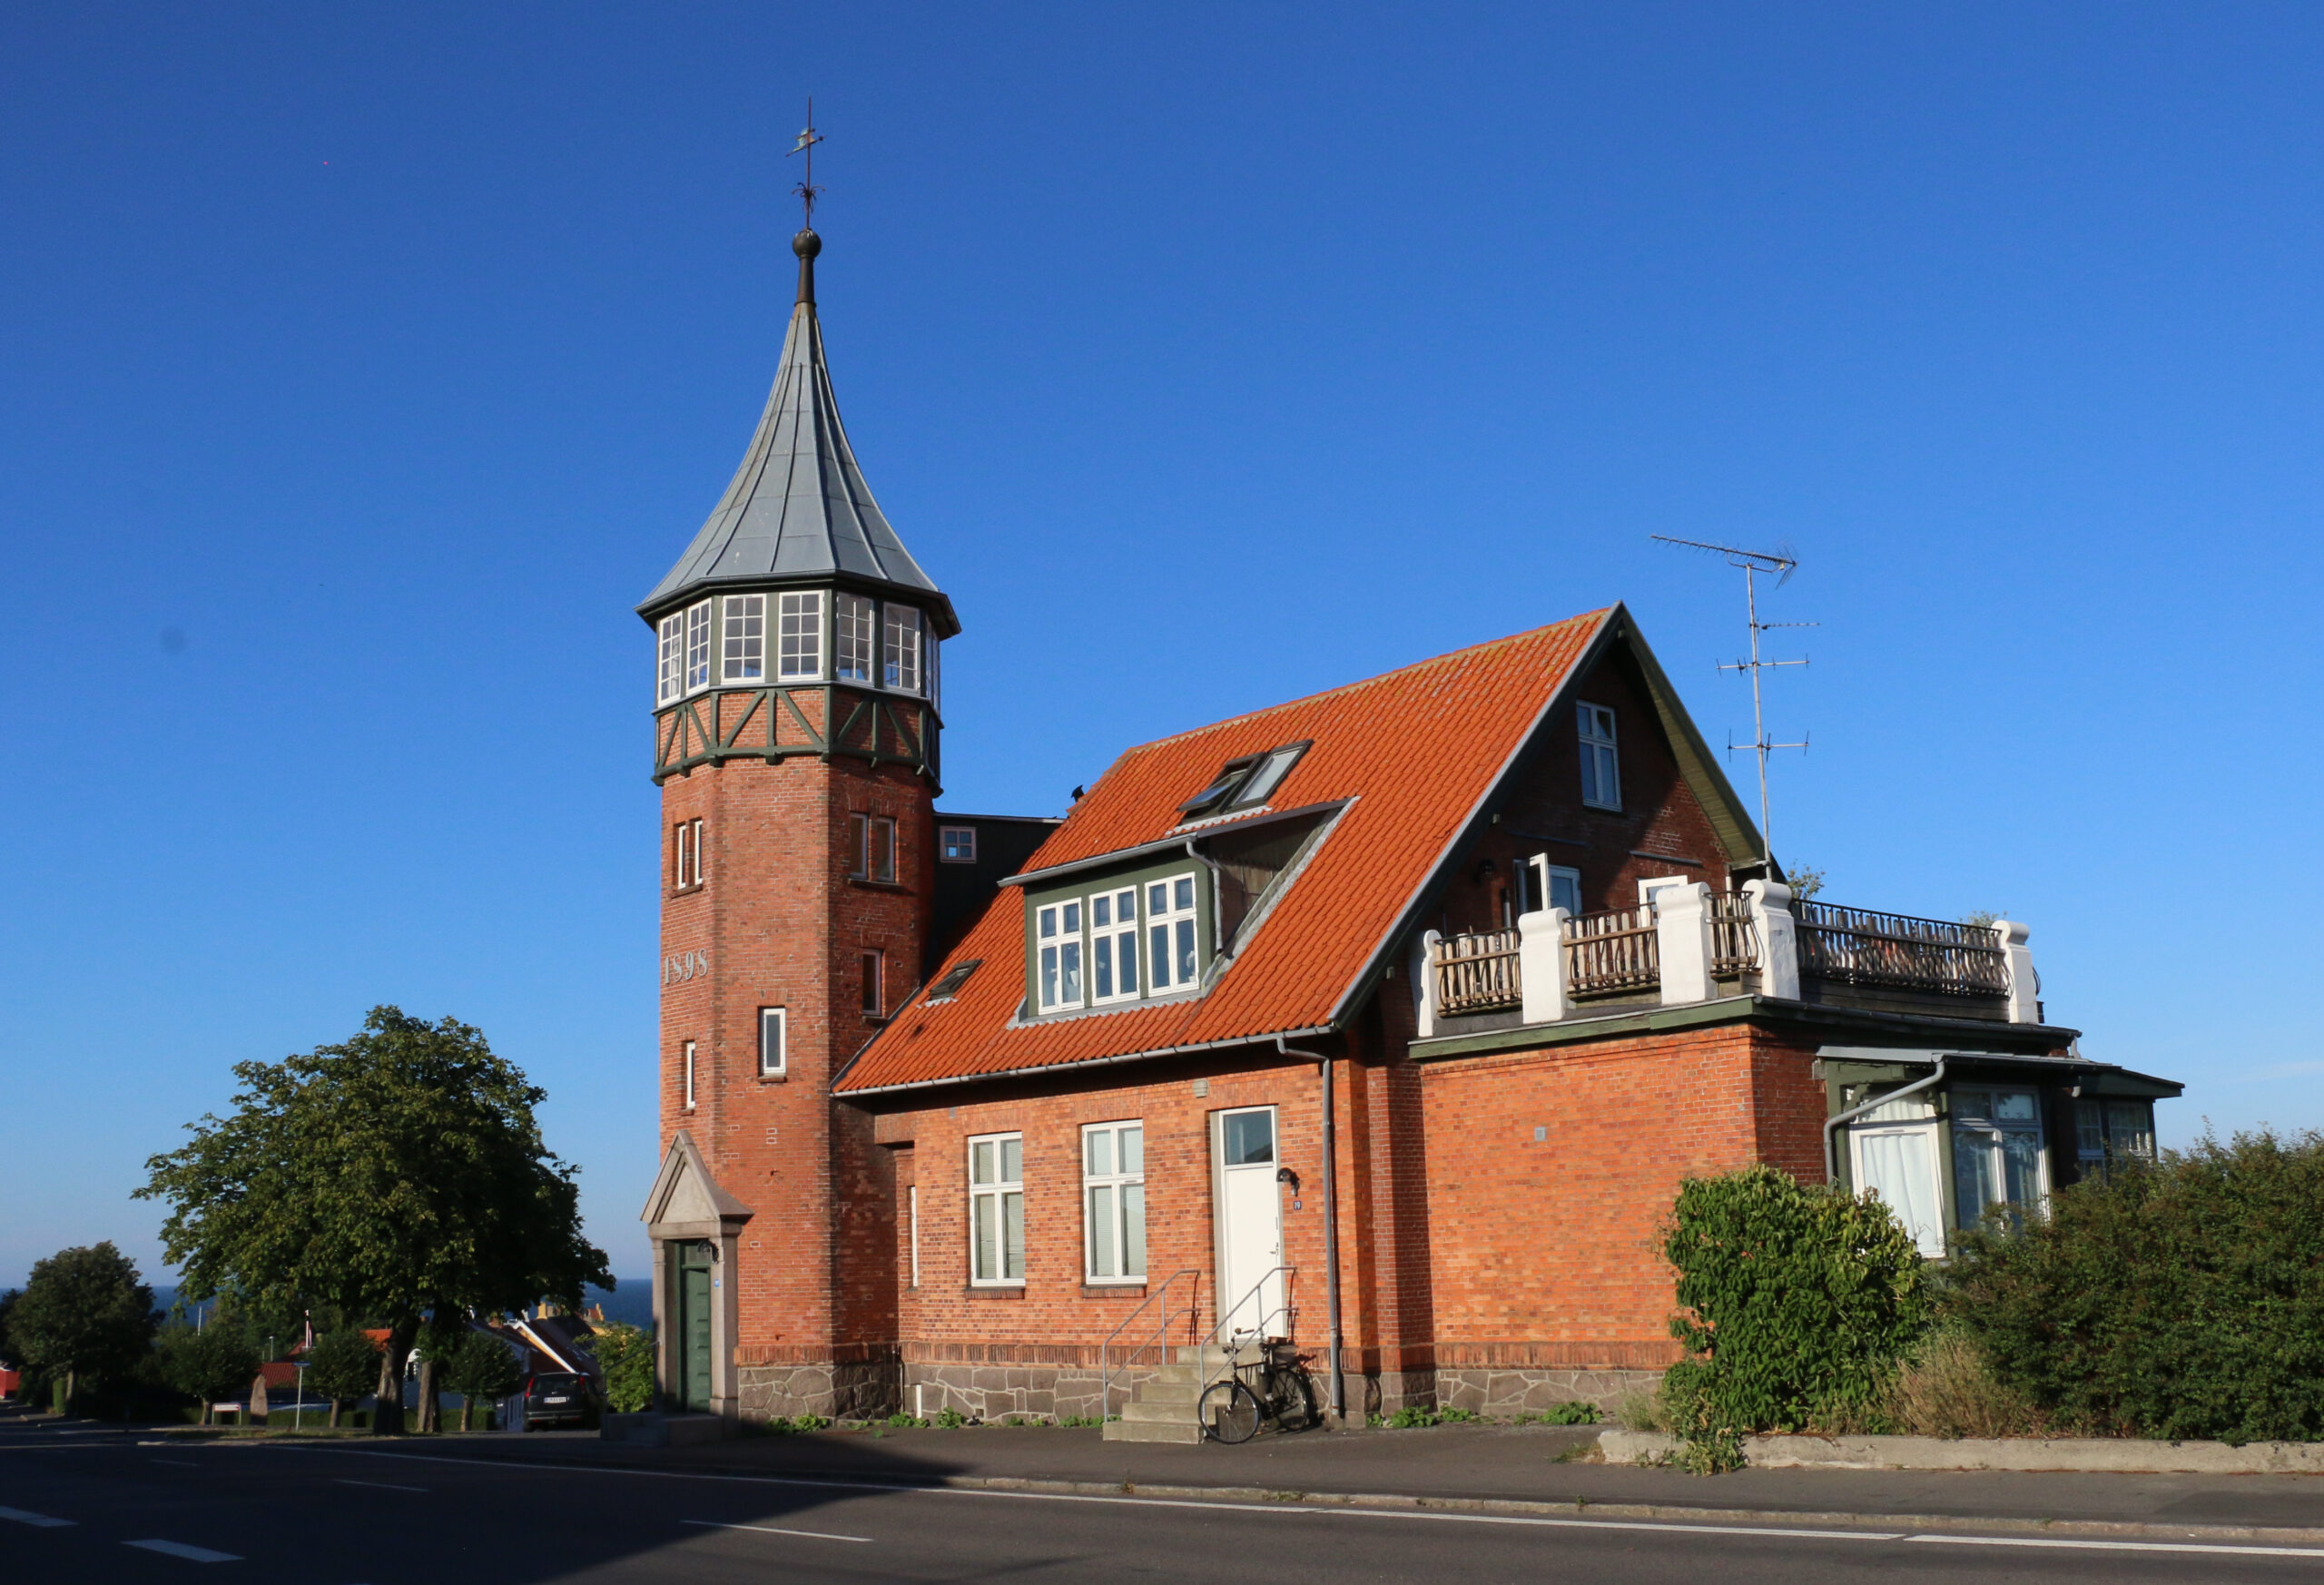 The tower house in Allinge